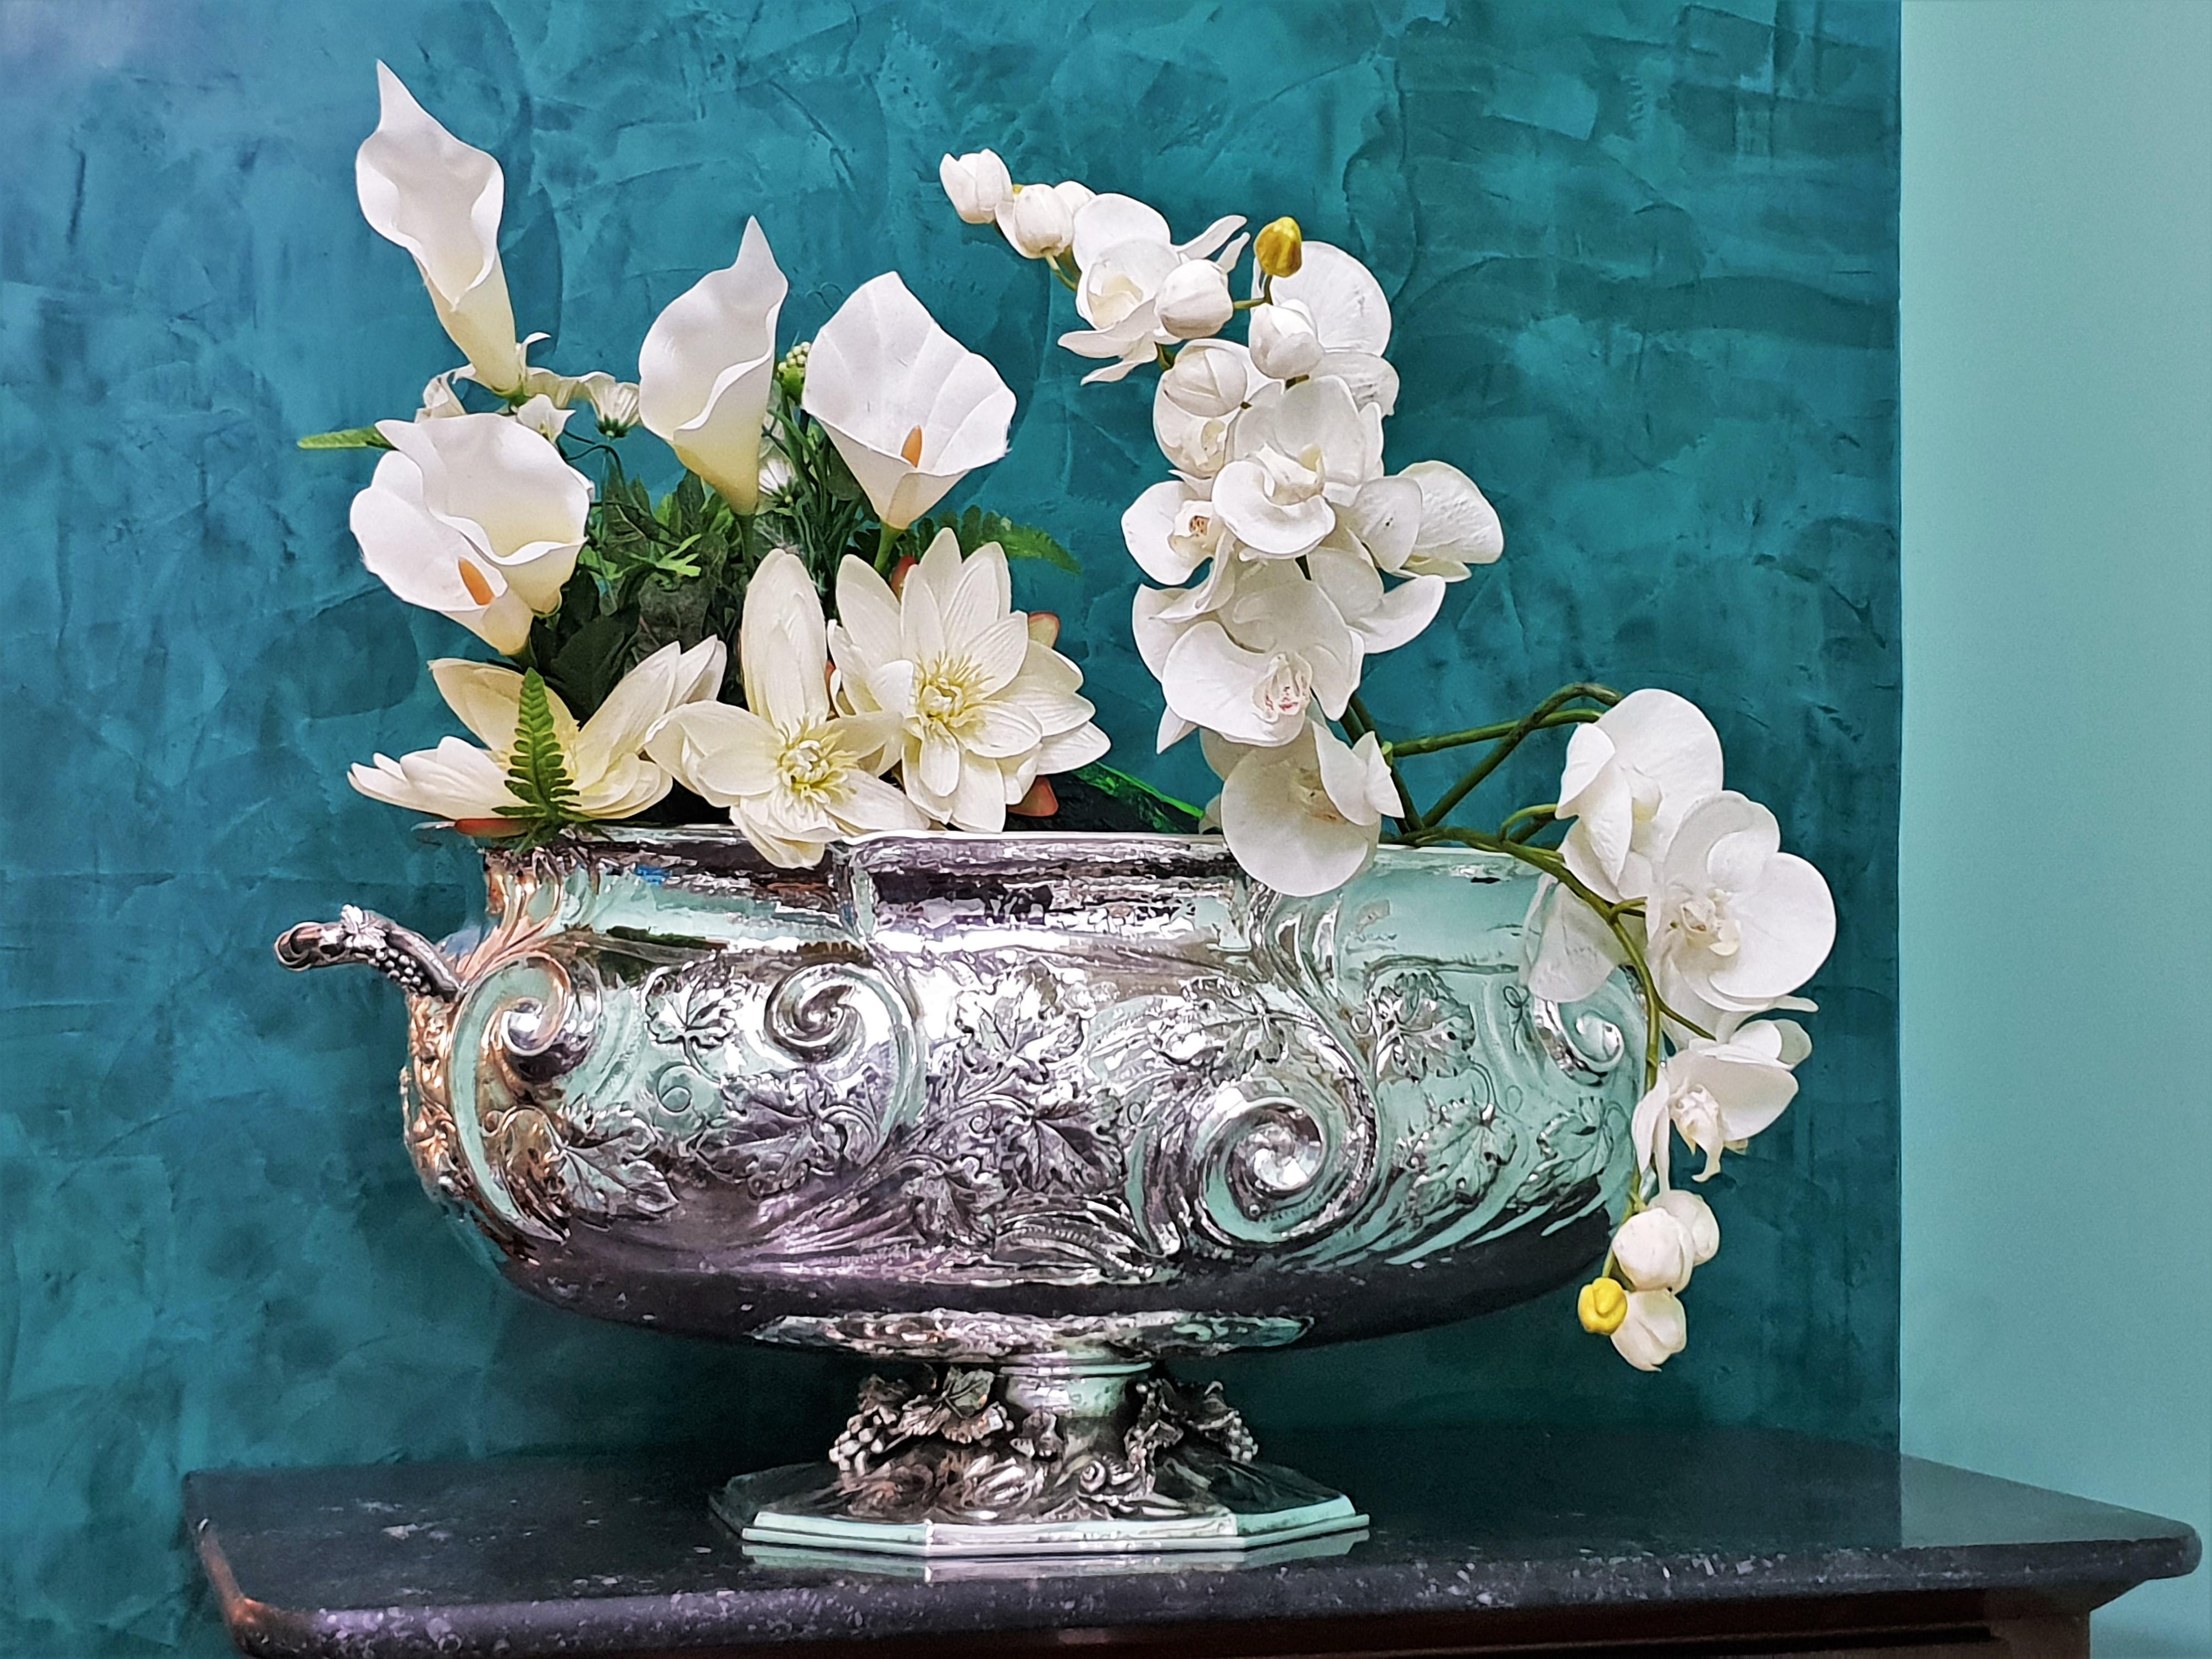 Cast 20th Century Fratelli Ponzone Rococo Engraved Silver Centerpiece, 1930s For Sale